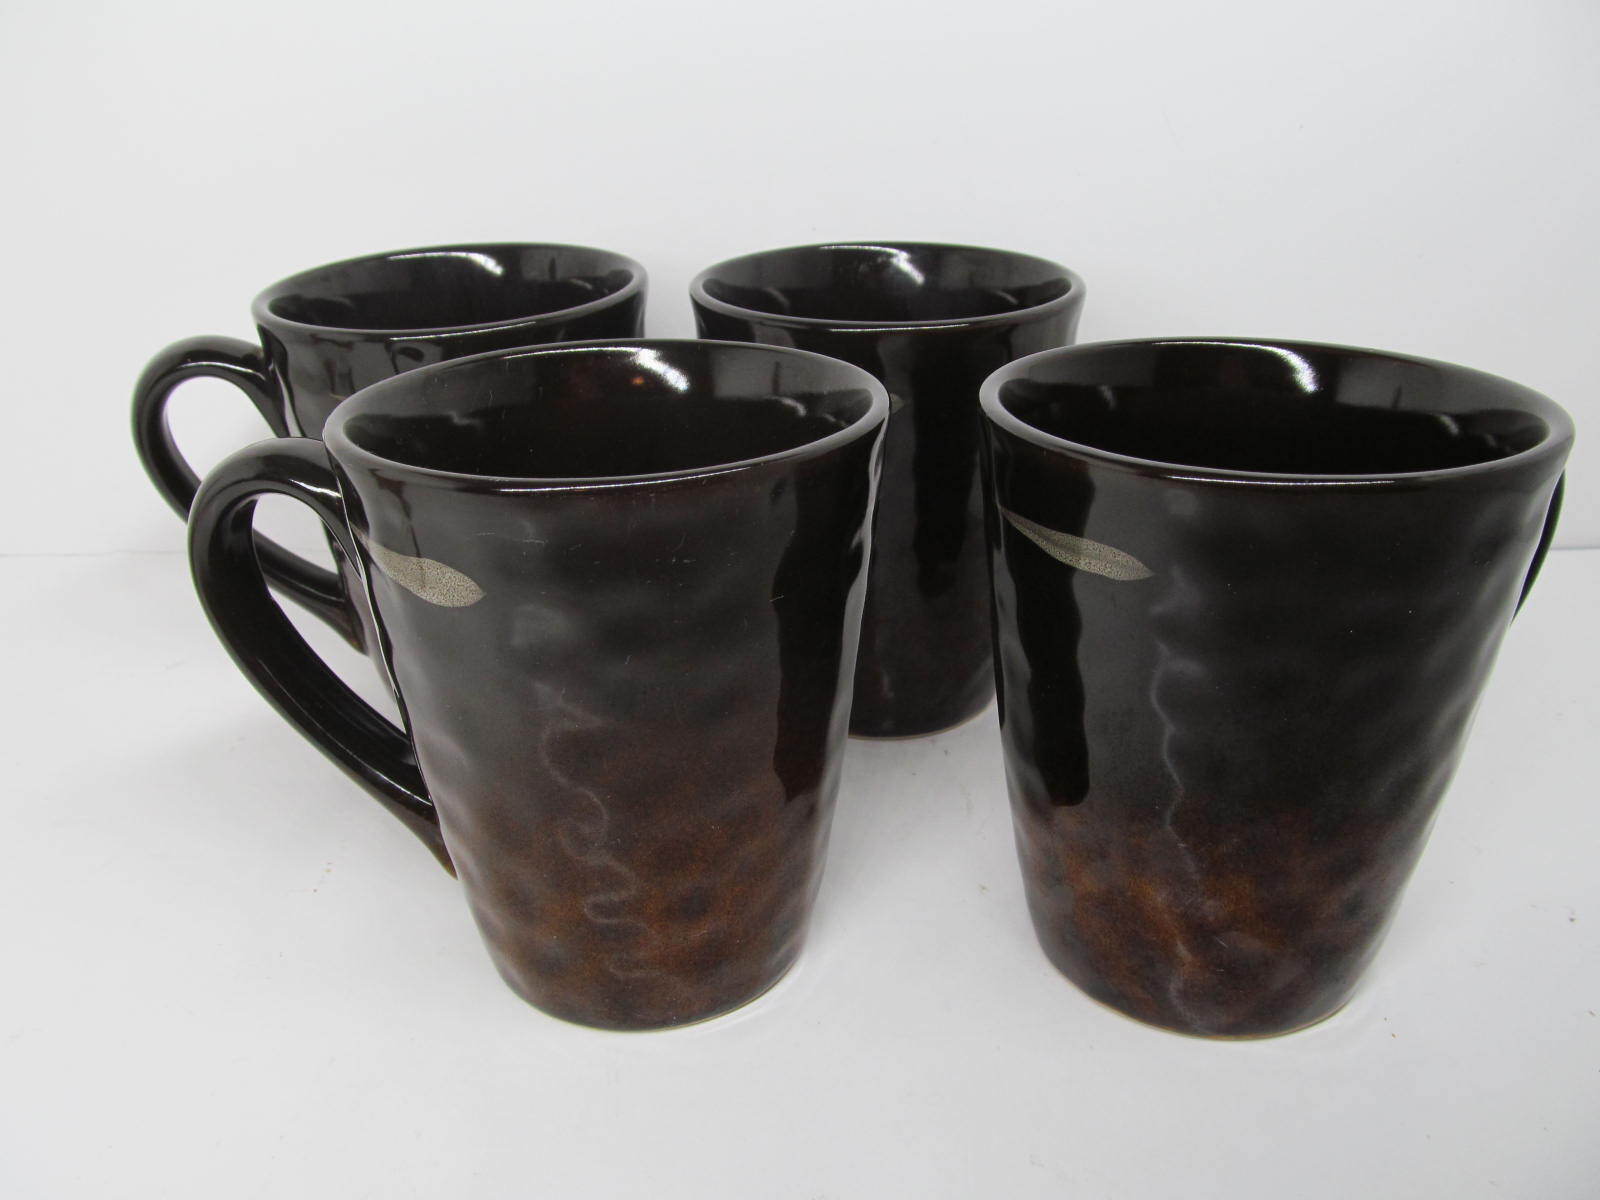 Mikasa Gallatin Set Of Four Coffee Mugs In Good Used Condition - $27.55